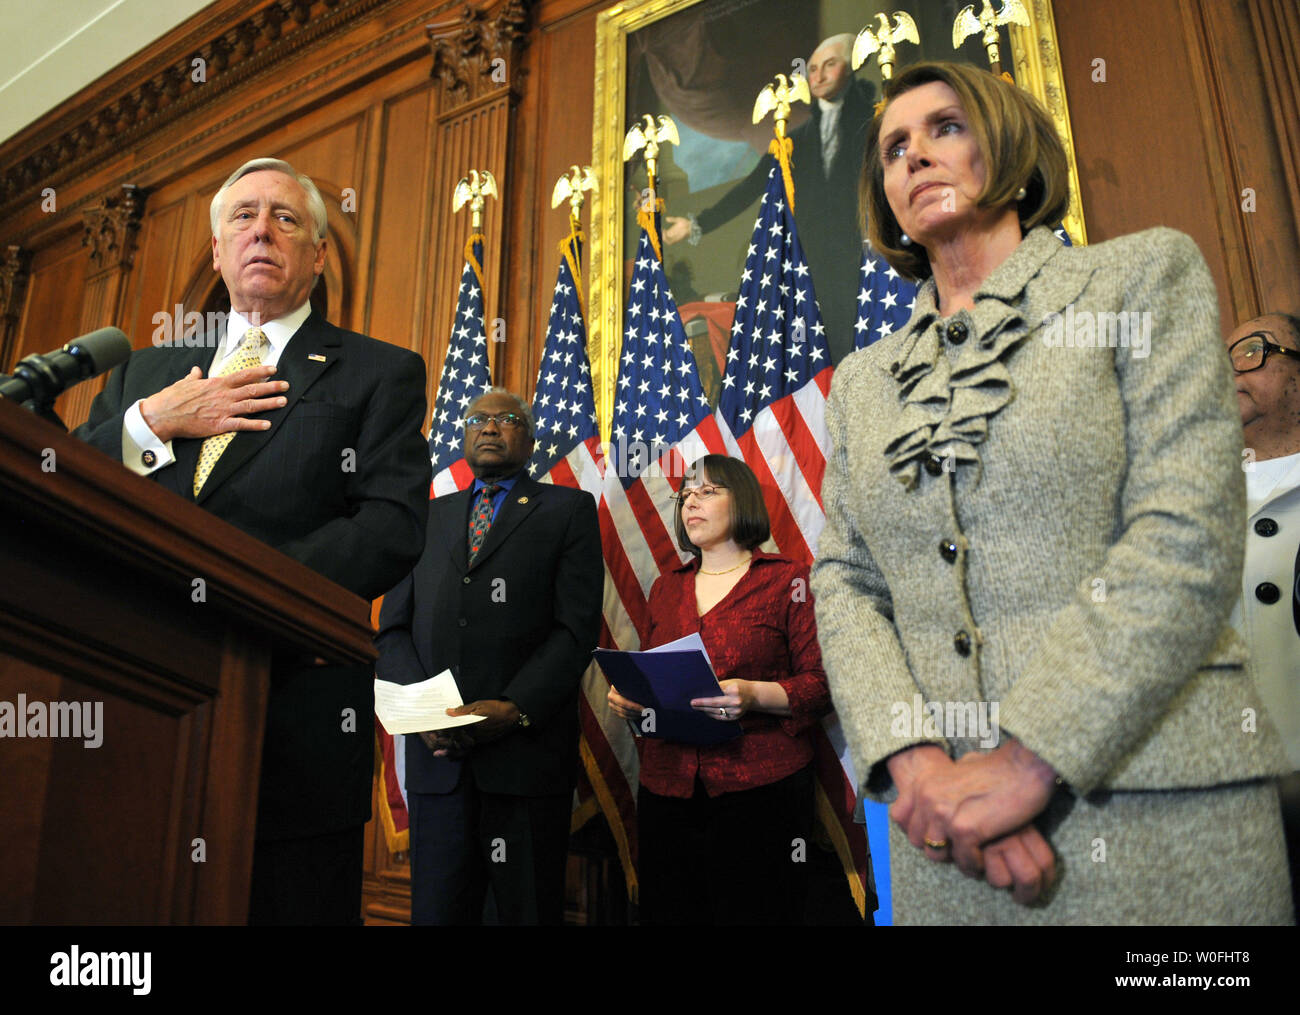 House Majority Leader Steny Hoyer (D-MD) speaks alongside Speaker of the House Nancy Pelosi (D-CA) as he delivers remarks on health care reform in Washington on March 18, 2010. Hoyer was also joined by House Majority Whip Rep. James Clyburn (D-SC) and Kim Moldofsky, a women who is going through medical insurance hardships.    UPI/Kevin Dietsch Stock Photo